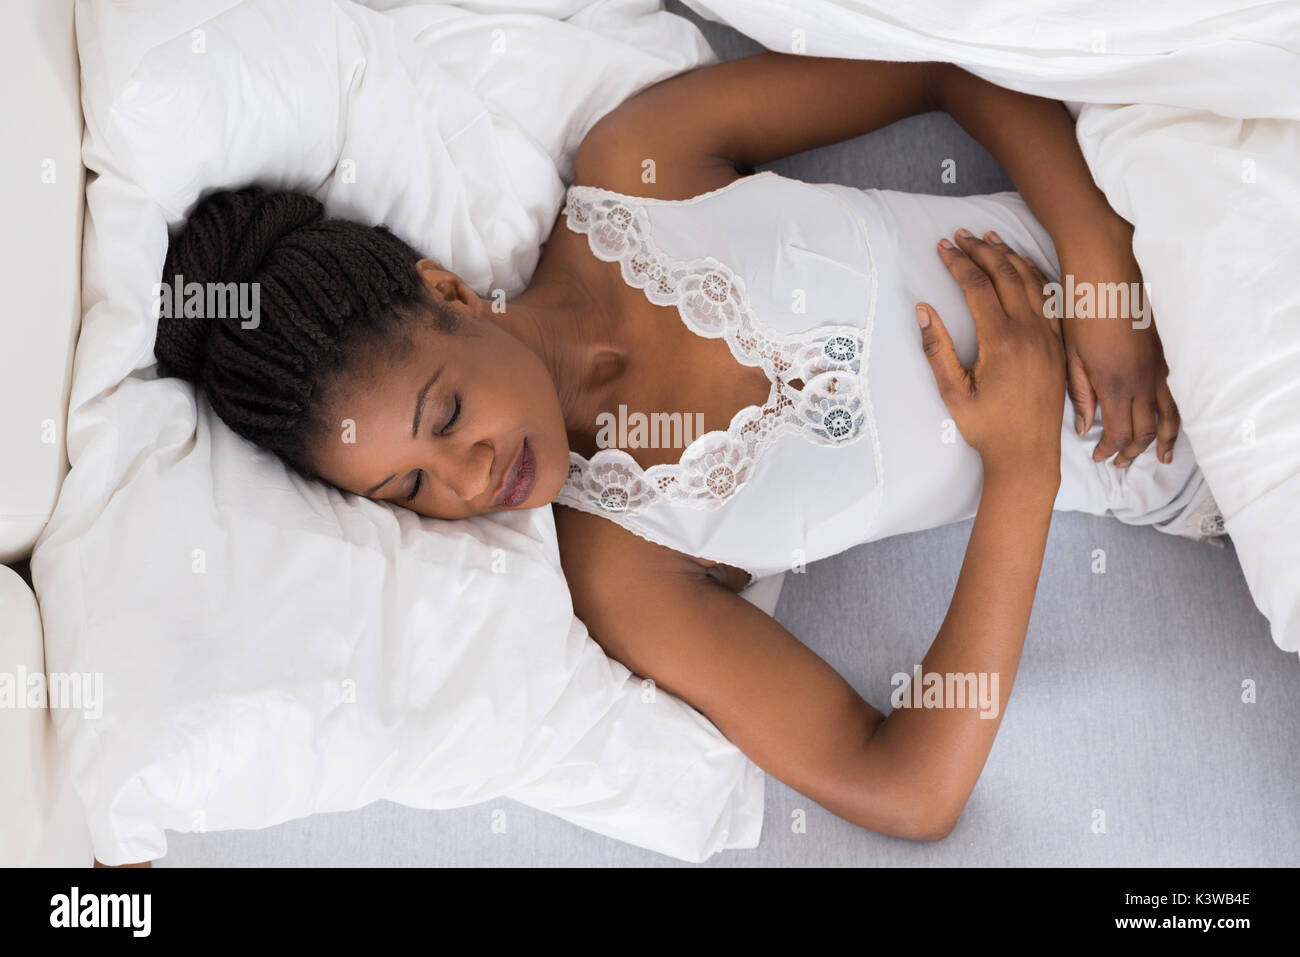 High Angle View Of Young African Woman Sleeping On Bed Stock Photo